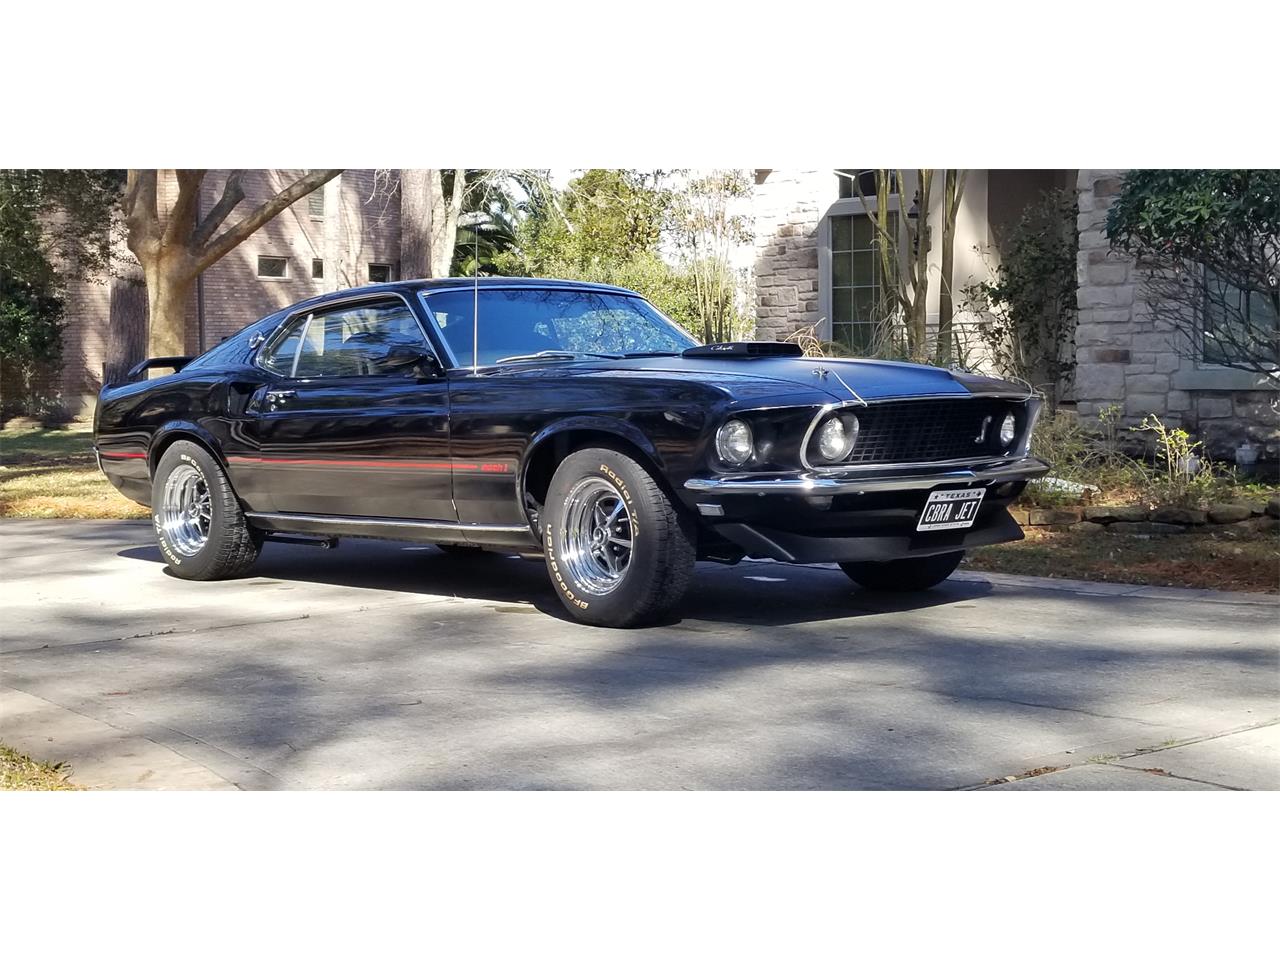 1969 Ford Mustang Mach 1 in Whitewater, Colorado